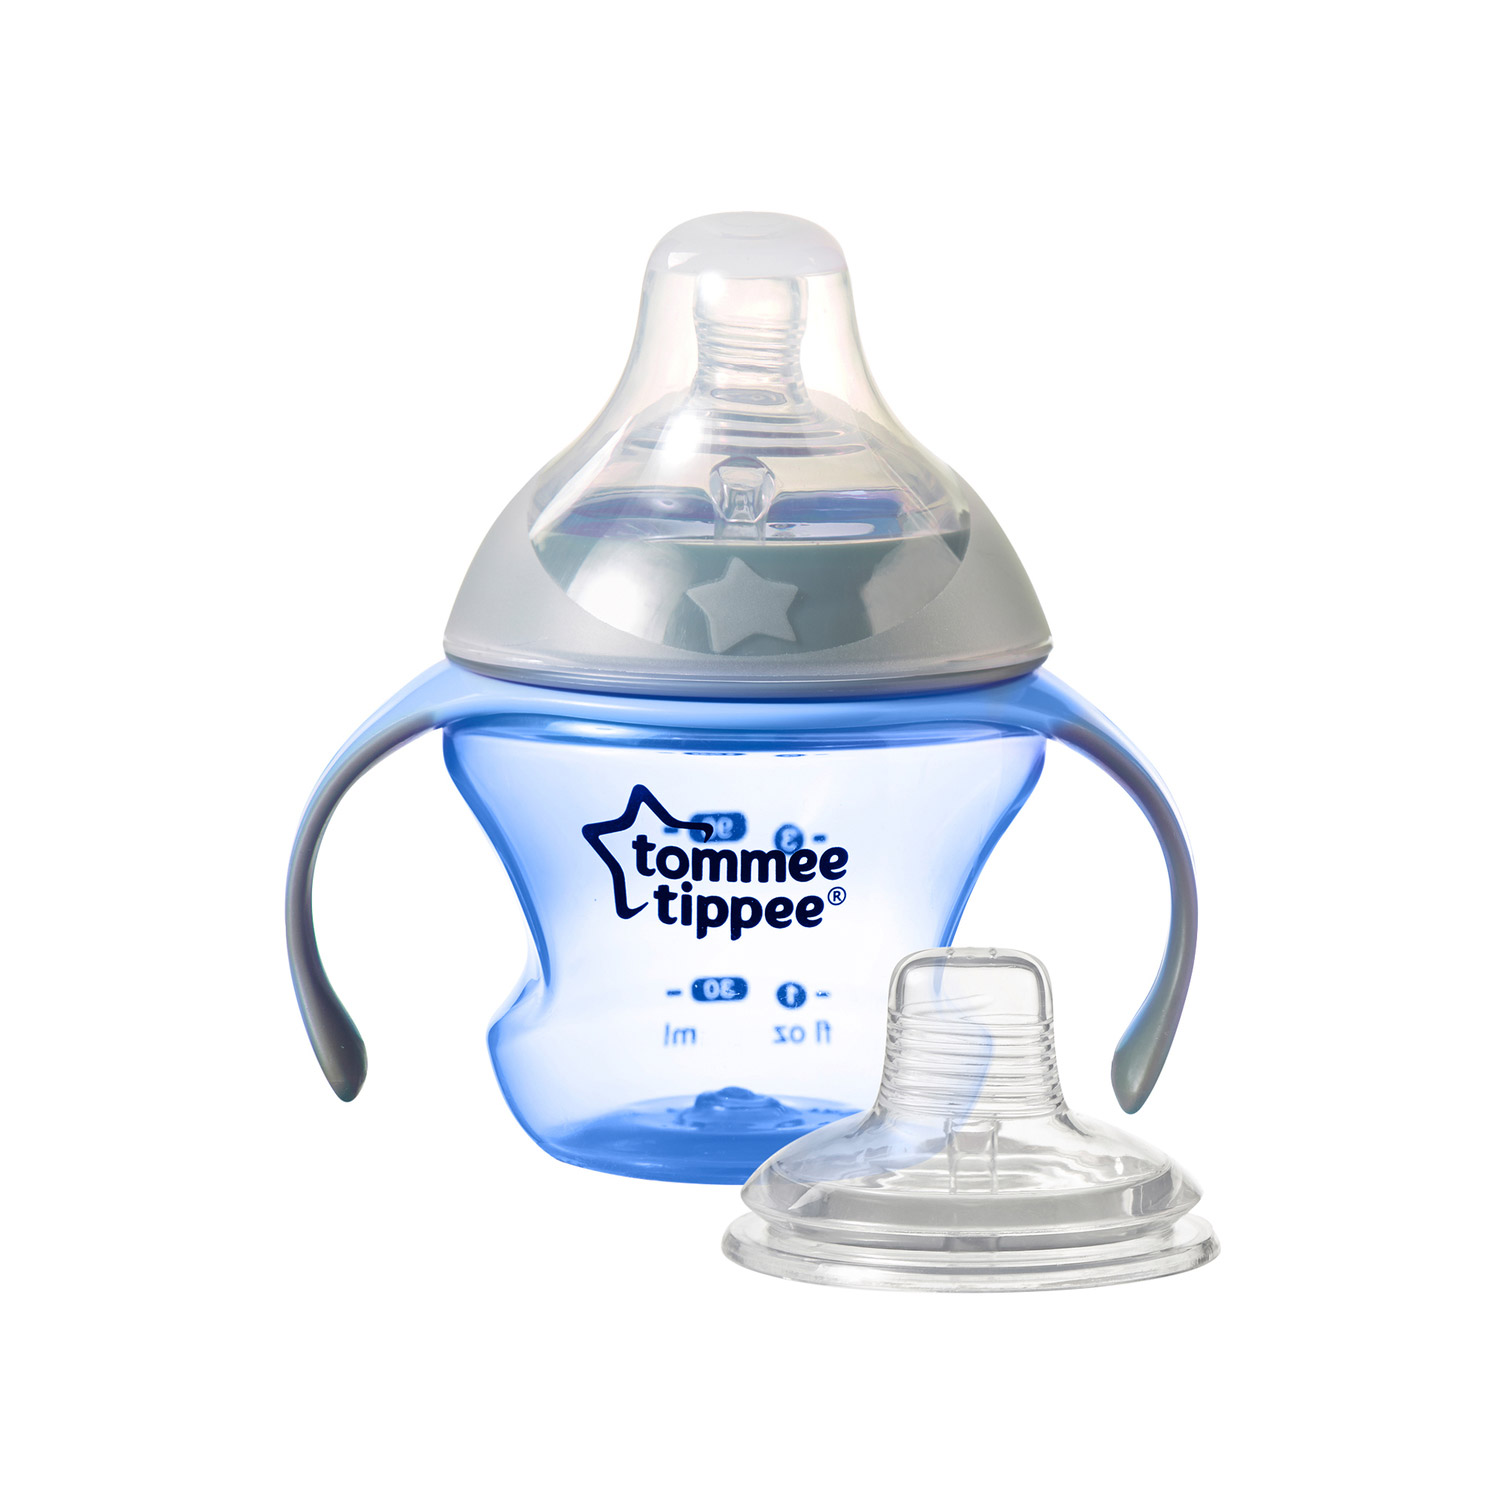 Tommee Tippee Transition Cup Tasse de Transition 4-7 Mois 150 ml